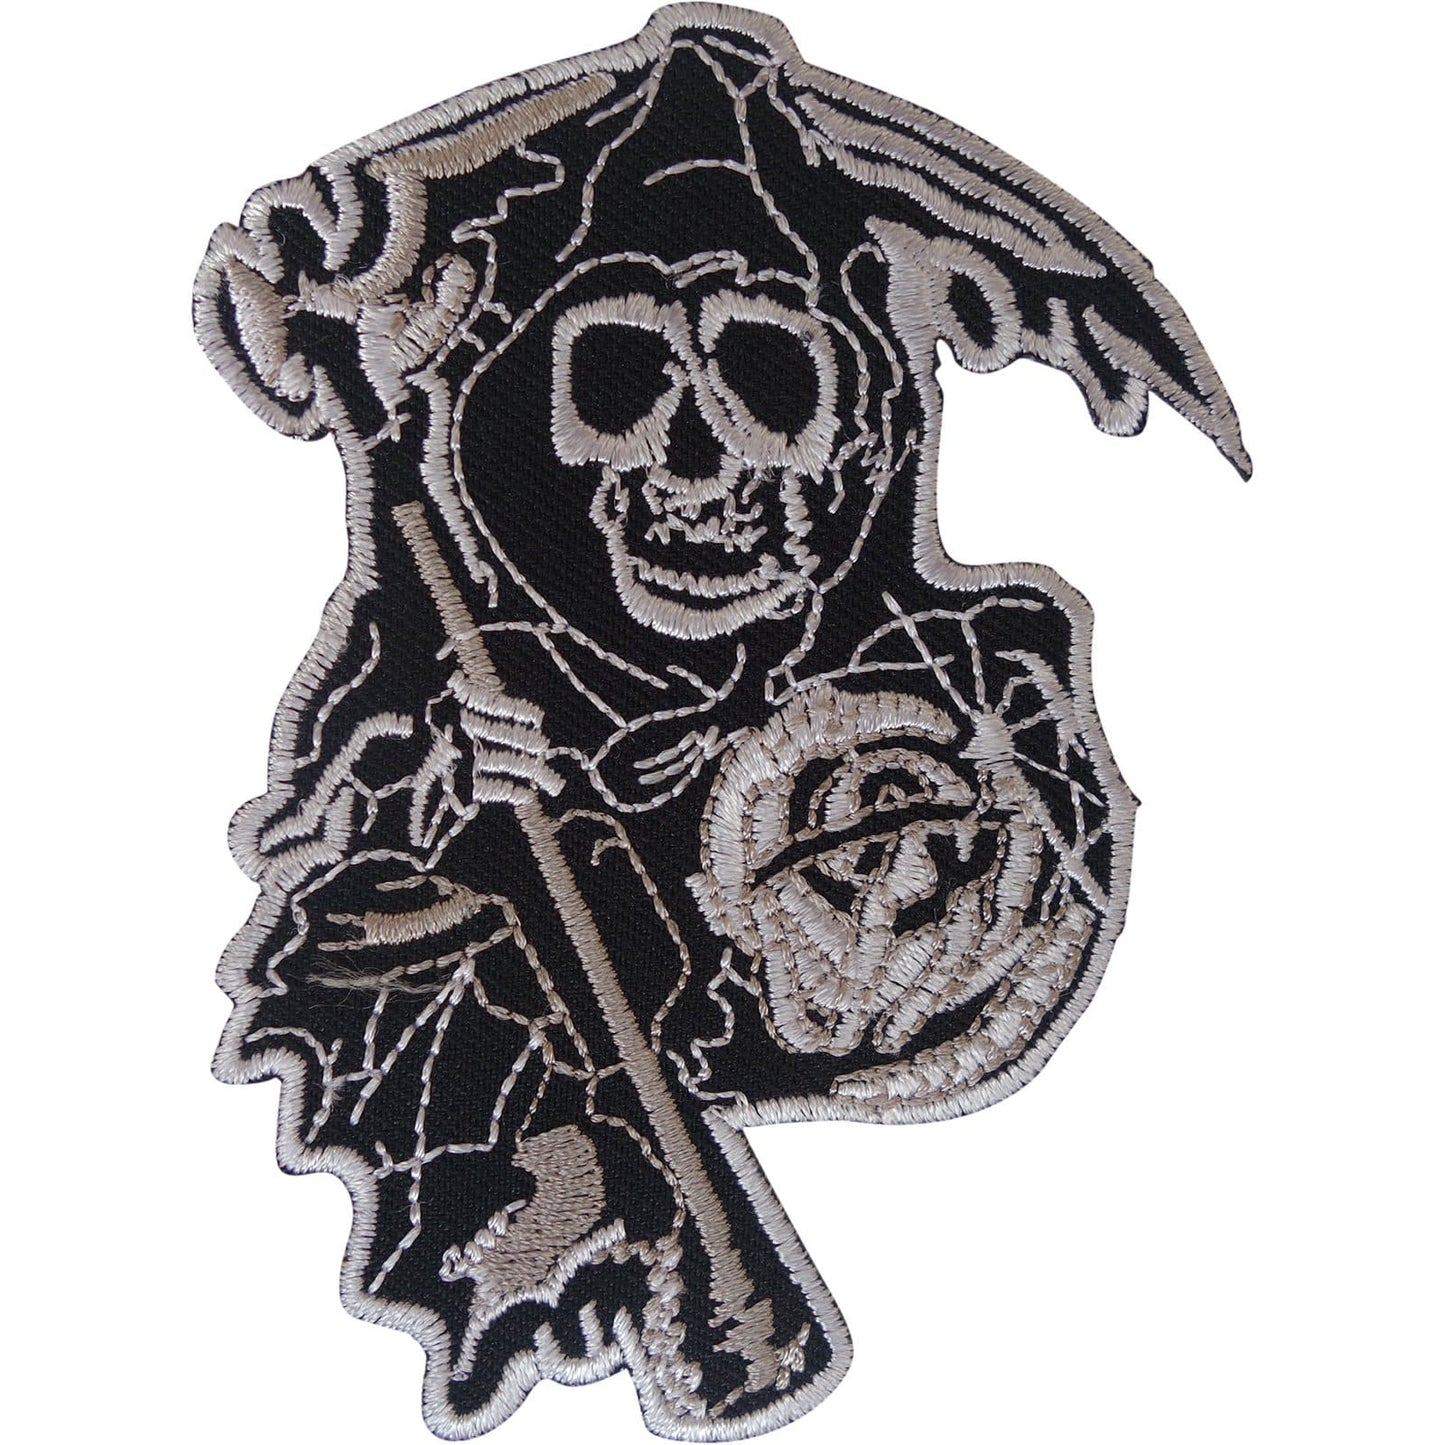 Grim Reaper Patch Iron Sew On Clothes Jeans Bag T Shirt Black Embroidered Badge